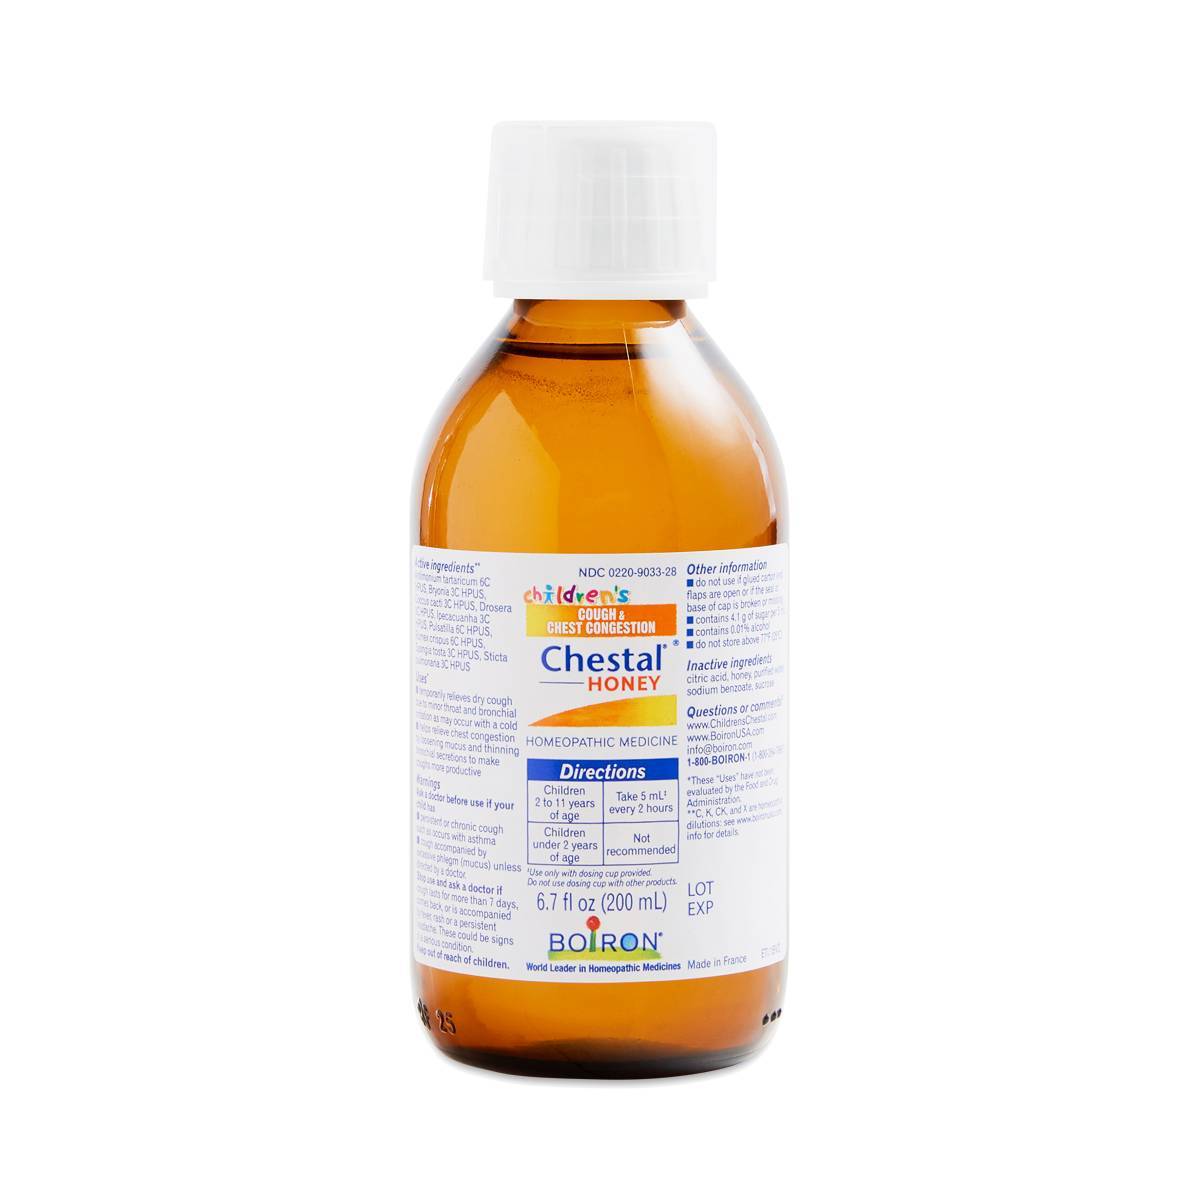 Bioron Chestal Childrens Cough, Chest Congestion Relief Syrup, Honey 6.7 oz